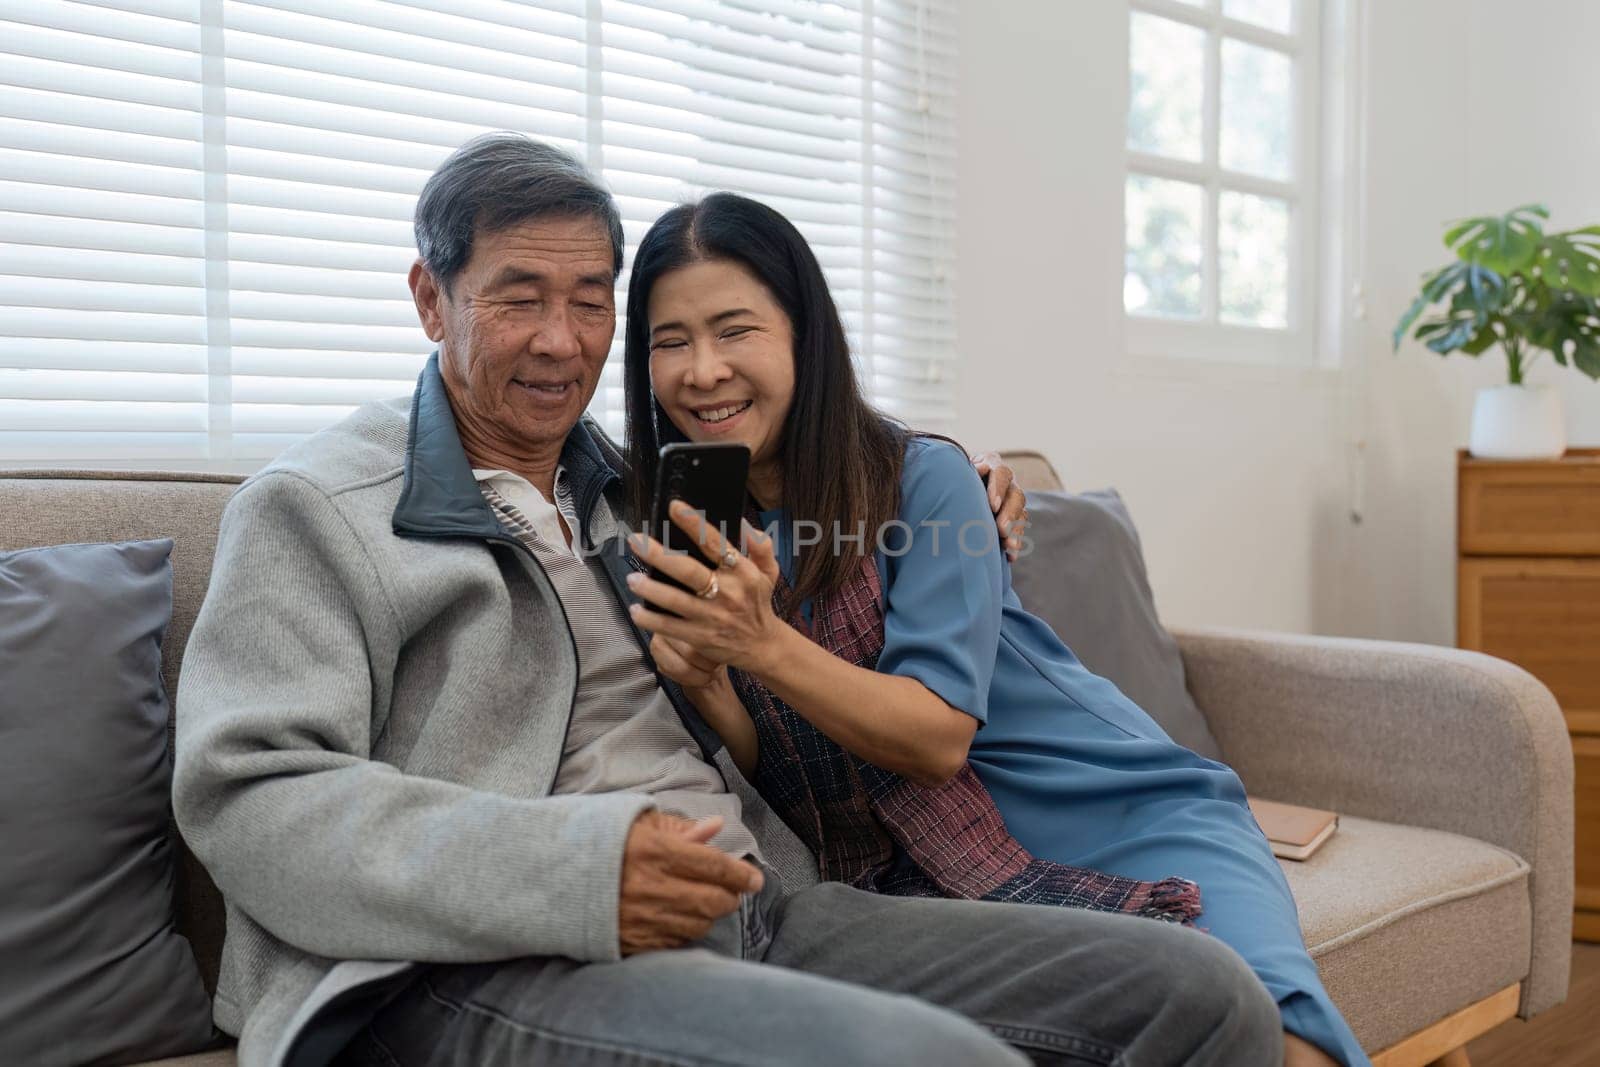 Happy married retirement couple looking at mobile using smartphone mobile technology device together, relaxing on couch doing online shopping.